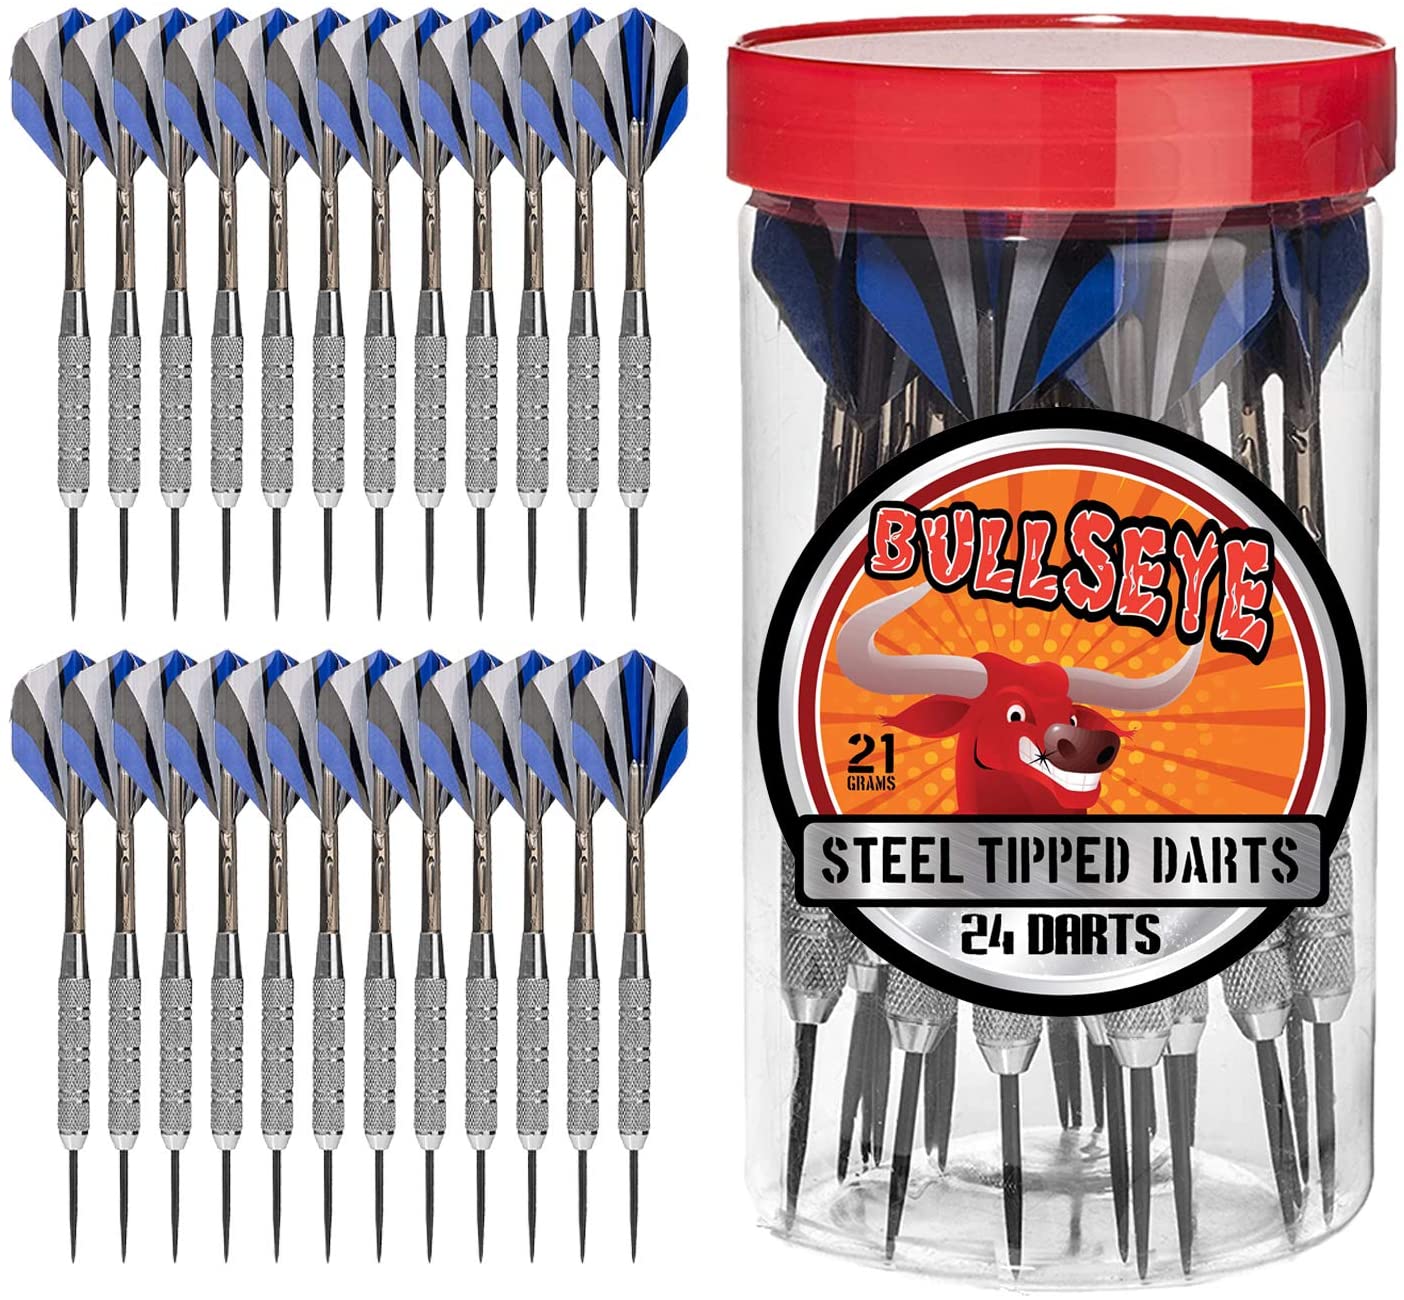 24 Pack Bullseye Steel Tip Darts with Flights in Handy Carry and Store Jar Carrying Case. 